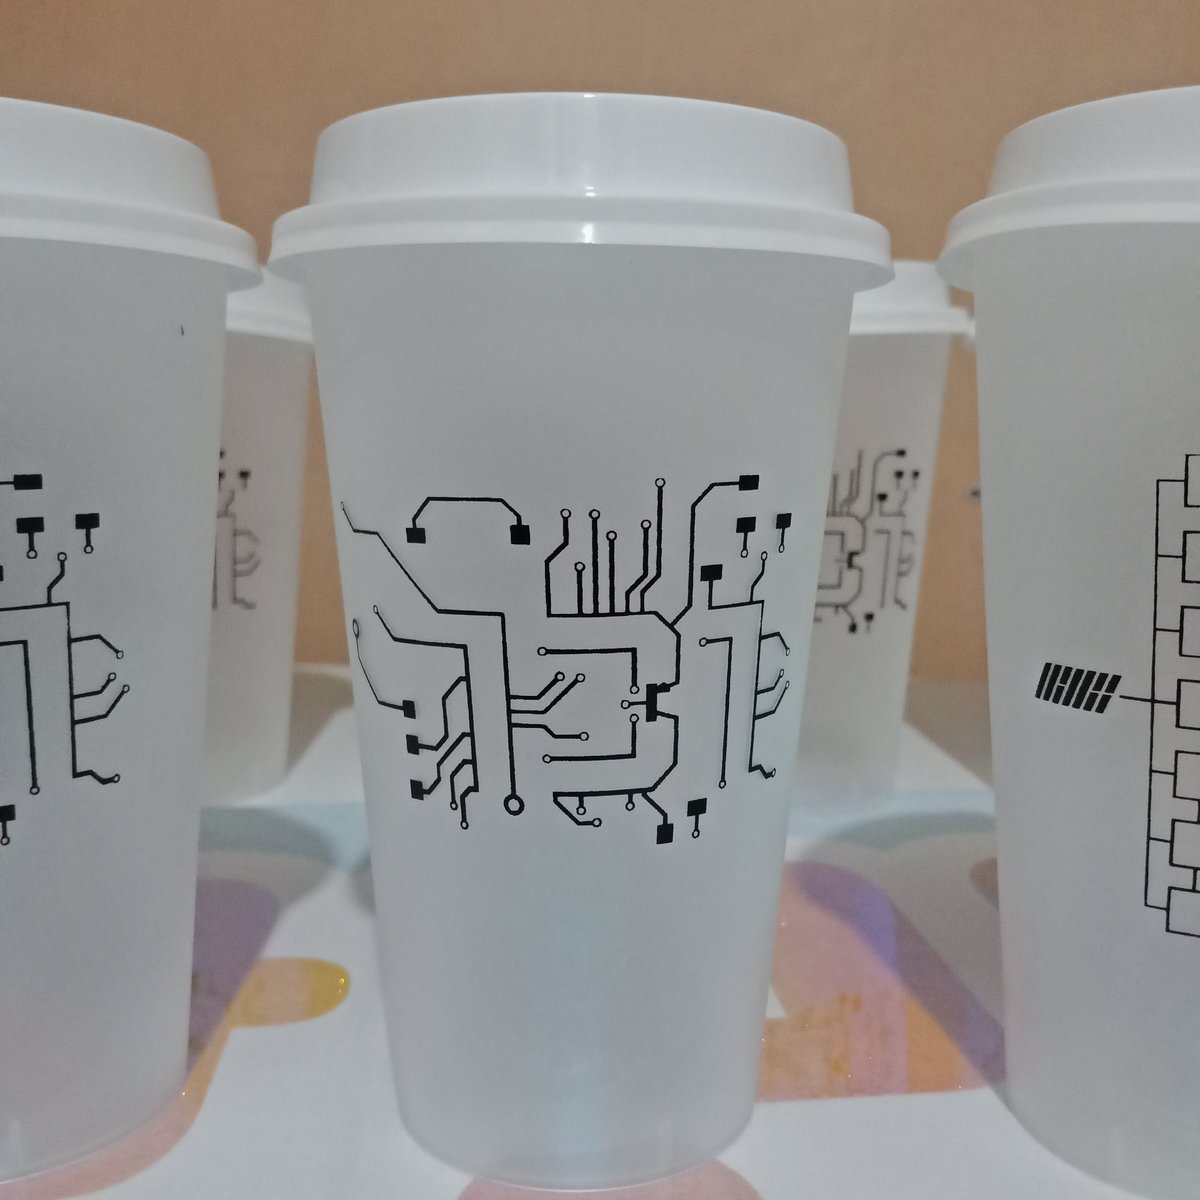 Here's the actual pics of our reusable tumblers. Order now:  http://bit.ly/LVEB_OnlineCSE INTERNATIONAL GO ㅡ OPENWe are now opening an int'l GO as we have extra tumblers. If you're interested, please send us a message. #HANBIN  #BI  #김한빈  #비아이  #LaVieEstBelle_OnlineCSE